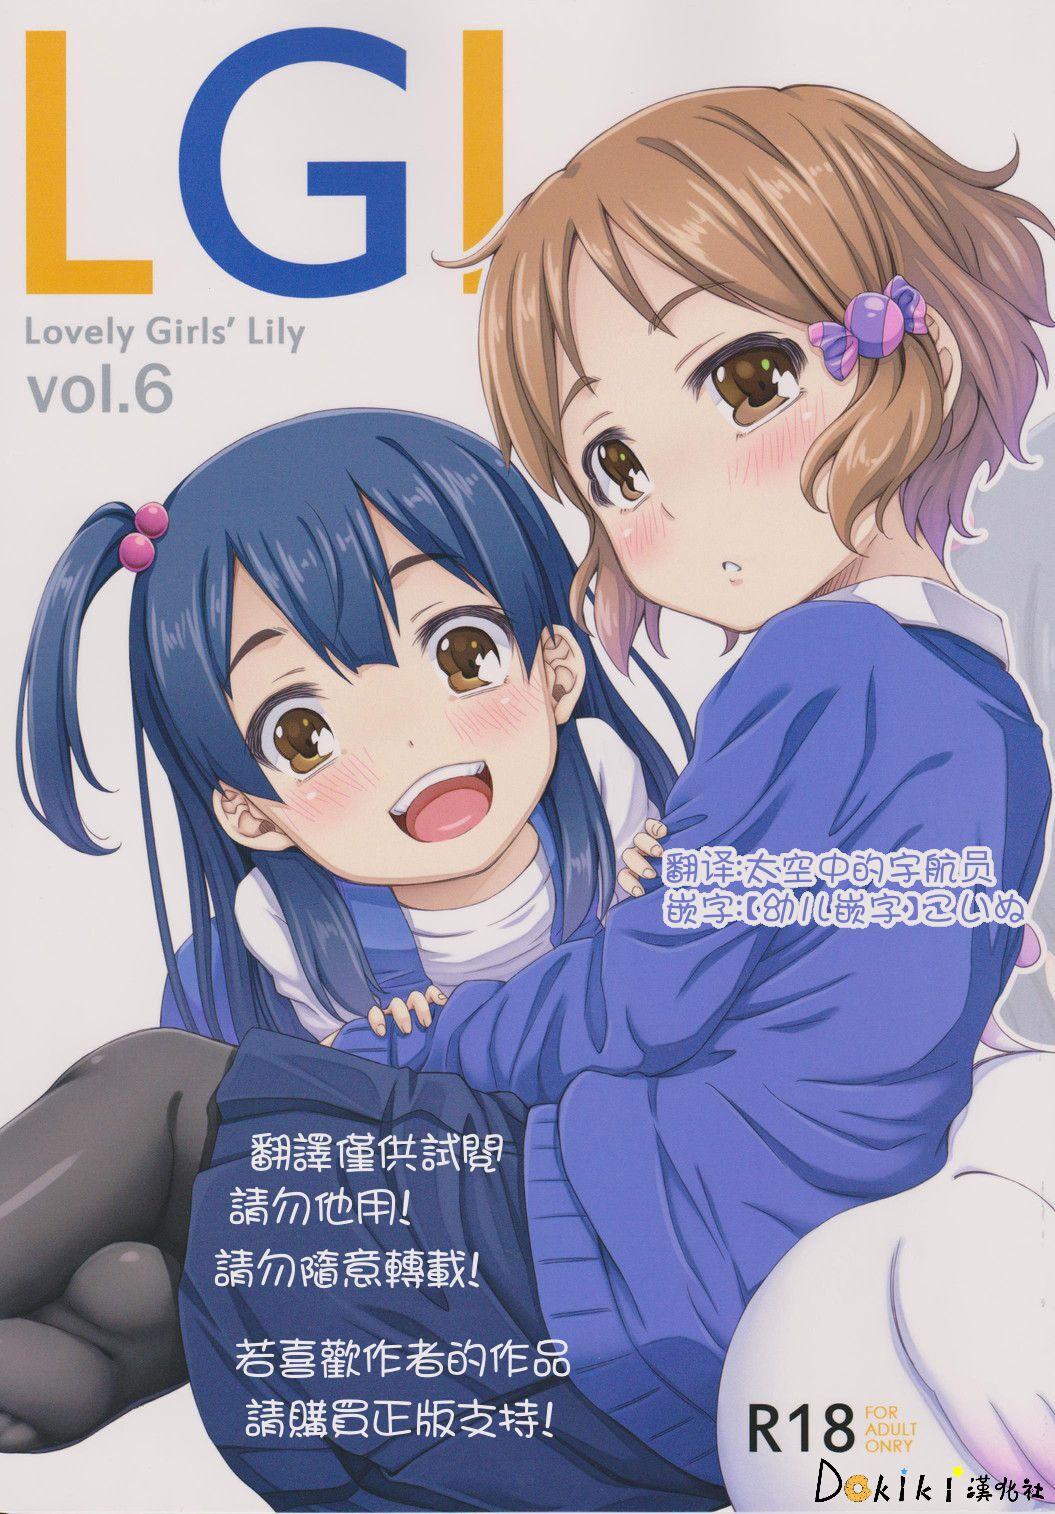 Asses Lovely Girls' Lily vol. 6 - Tamako market Relax - Picture 1